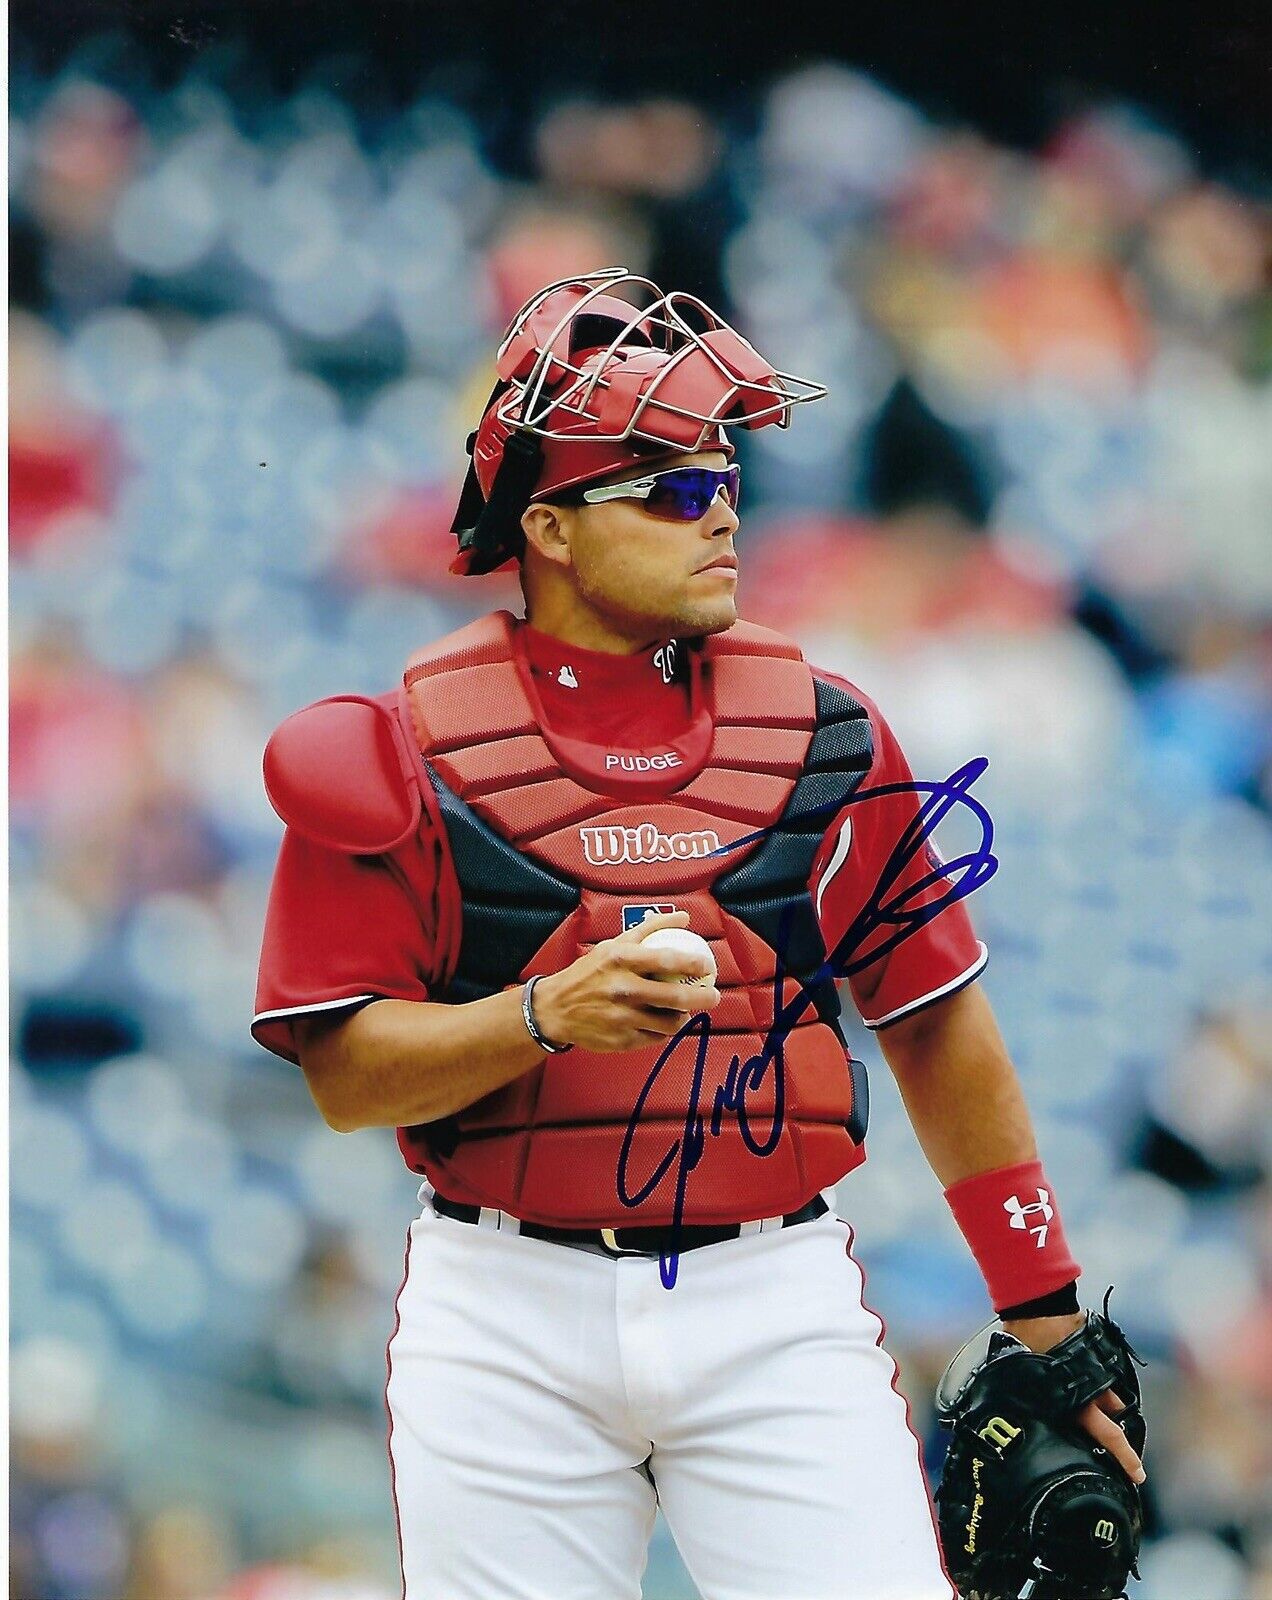 ivan rodriguez Auto Signed 8x10 Pic Photo Poster painting Rangers